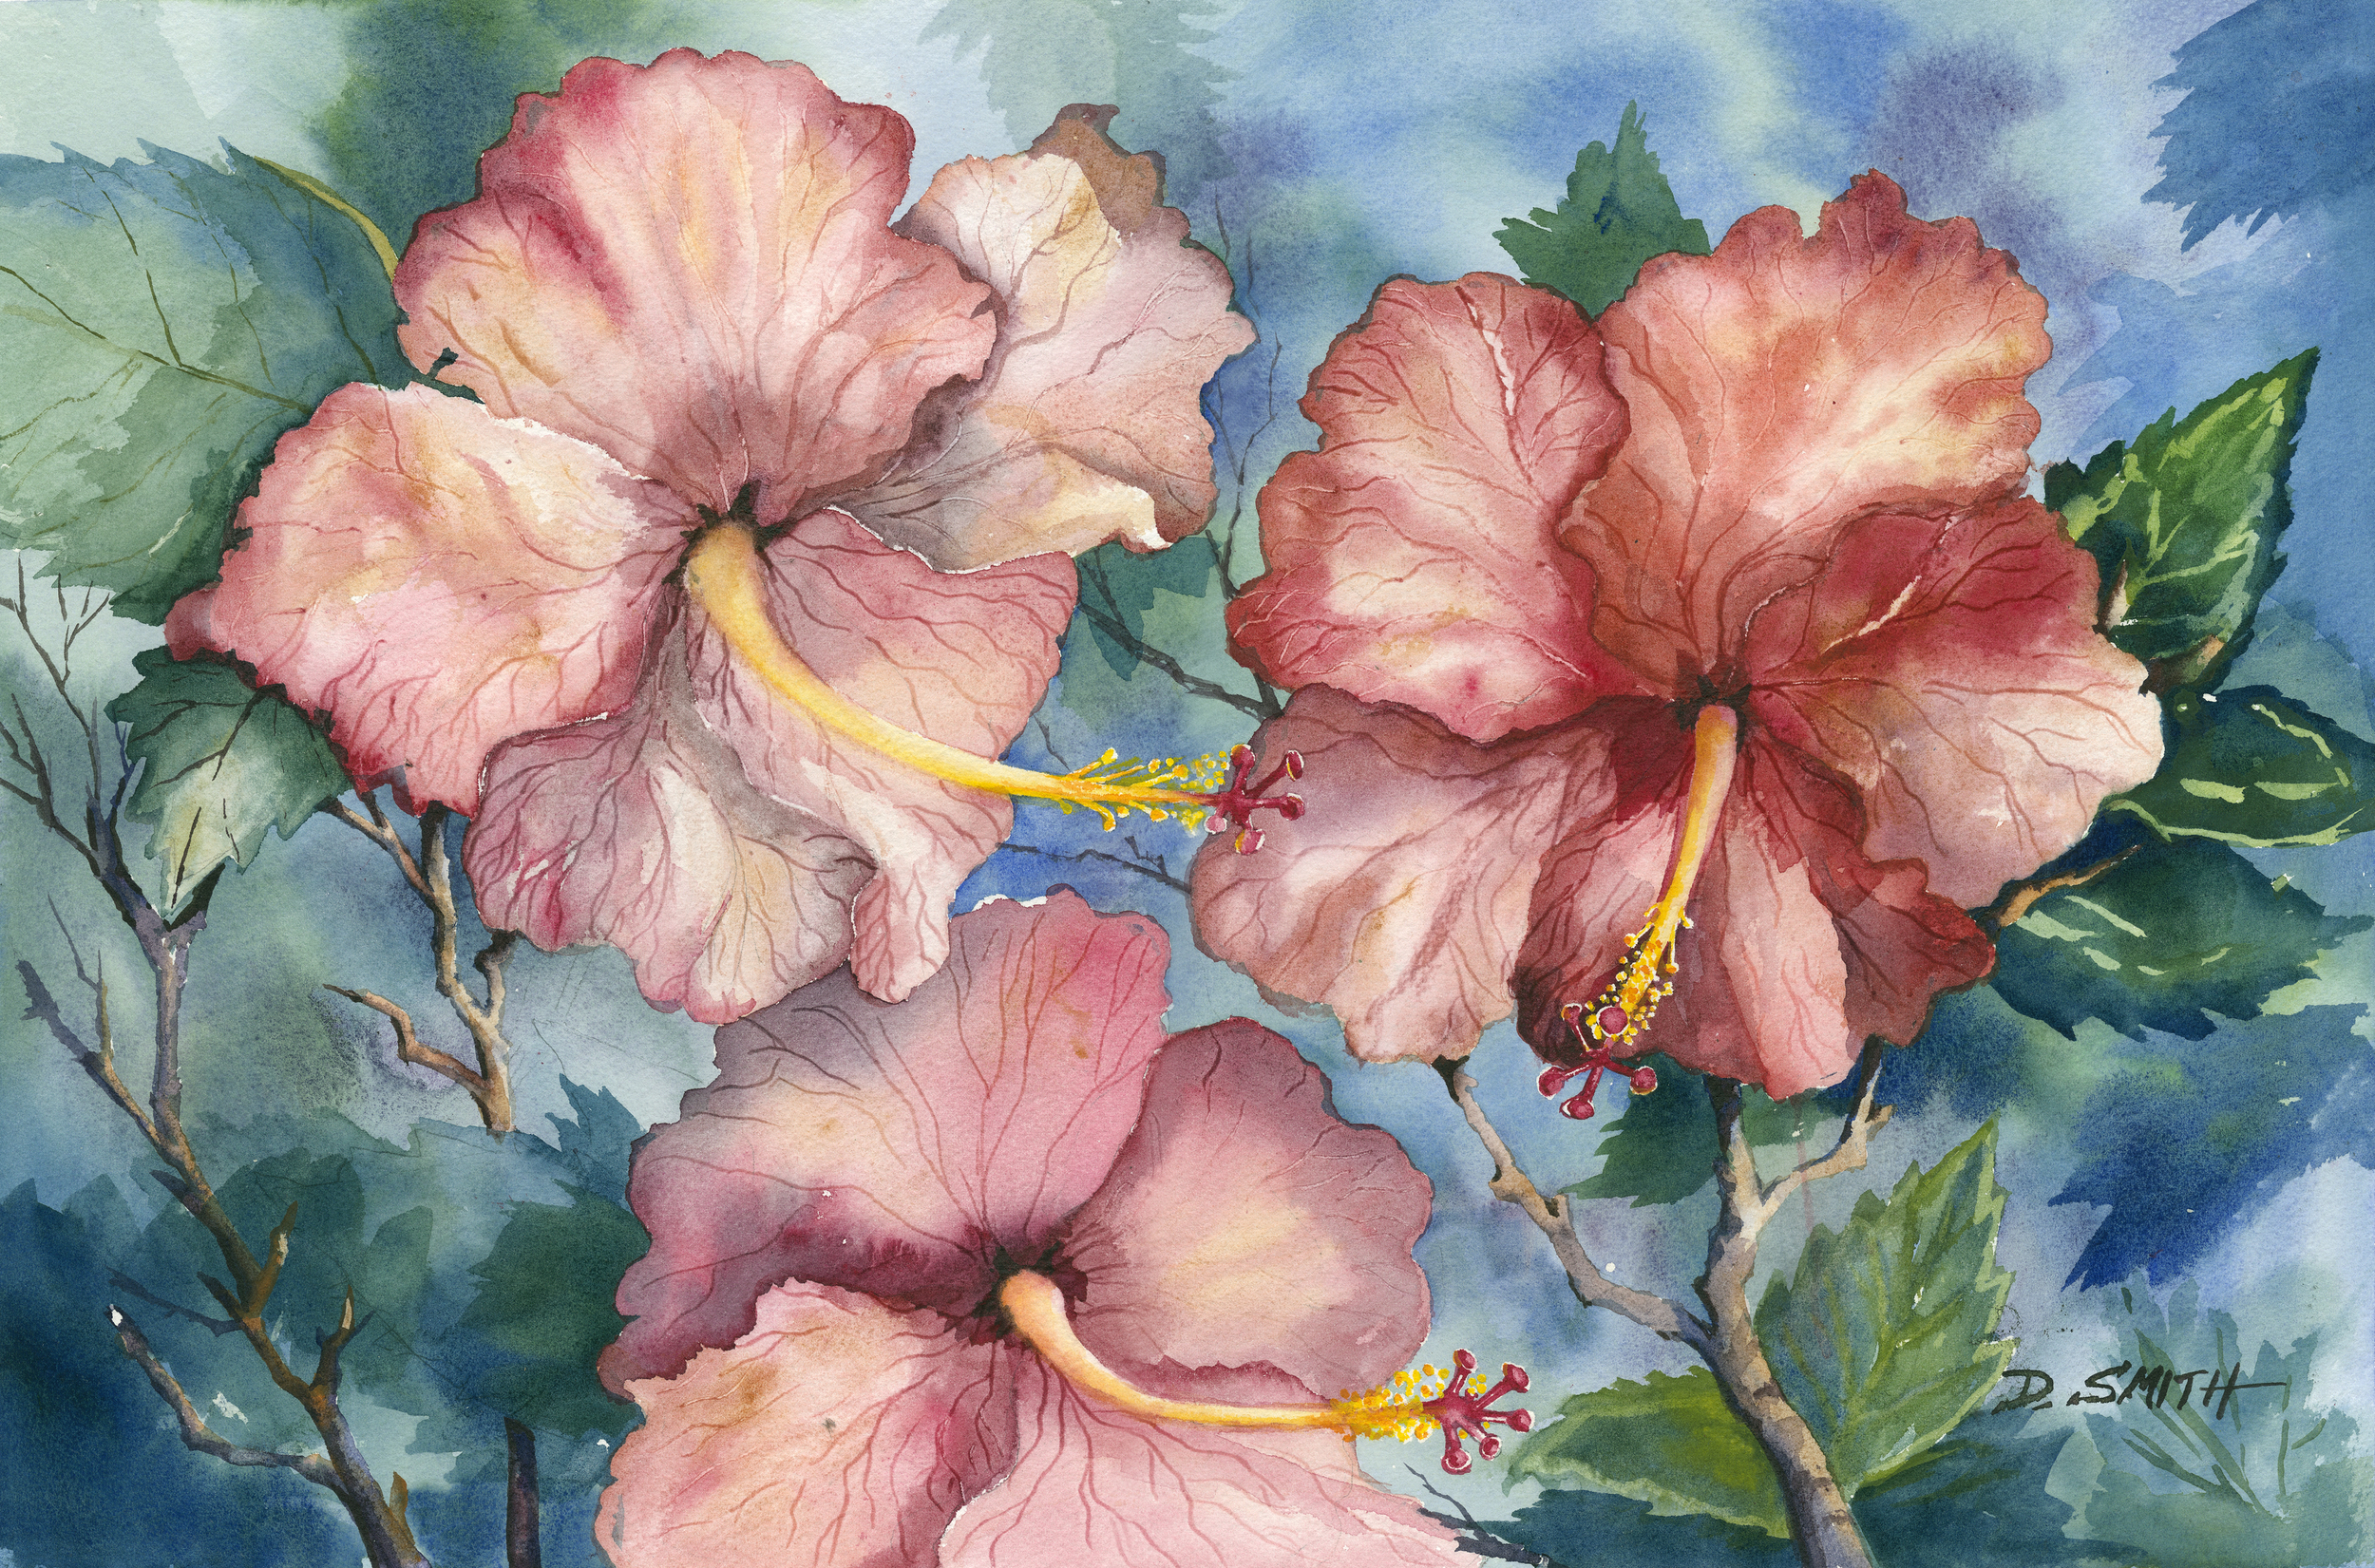 "Hibiscus # 2" - Sold - Prints Available